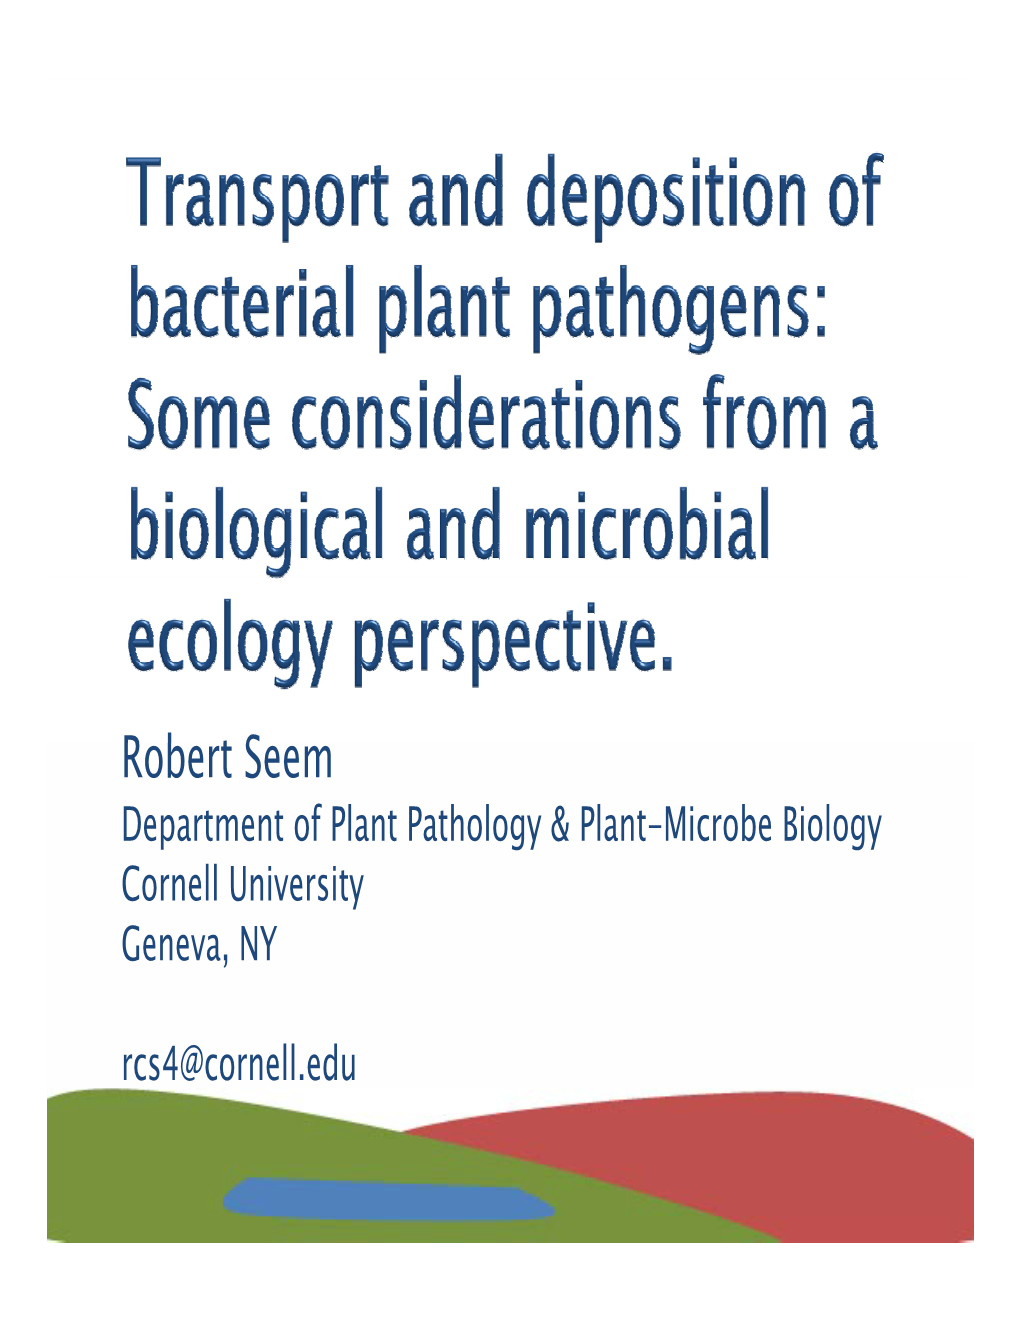 Transport, Deposition and Detection of Bacterial Plant Pathogens: New